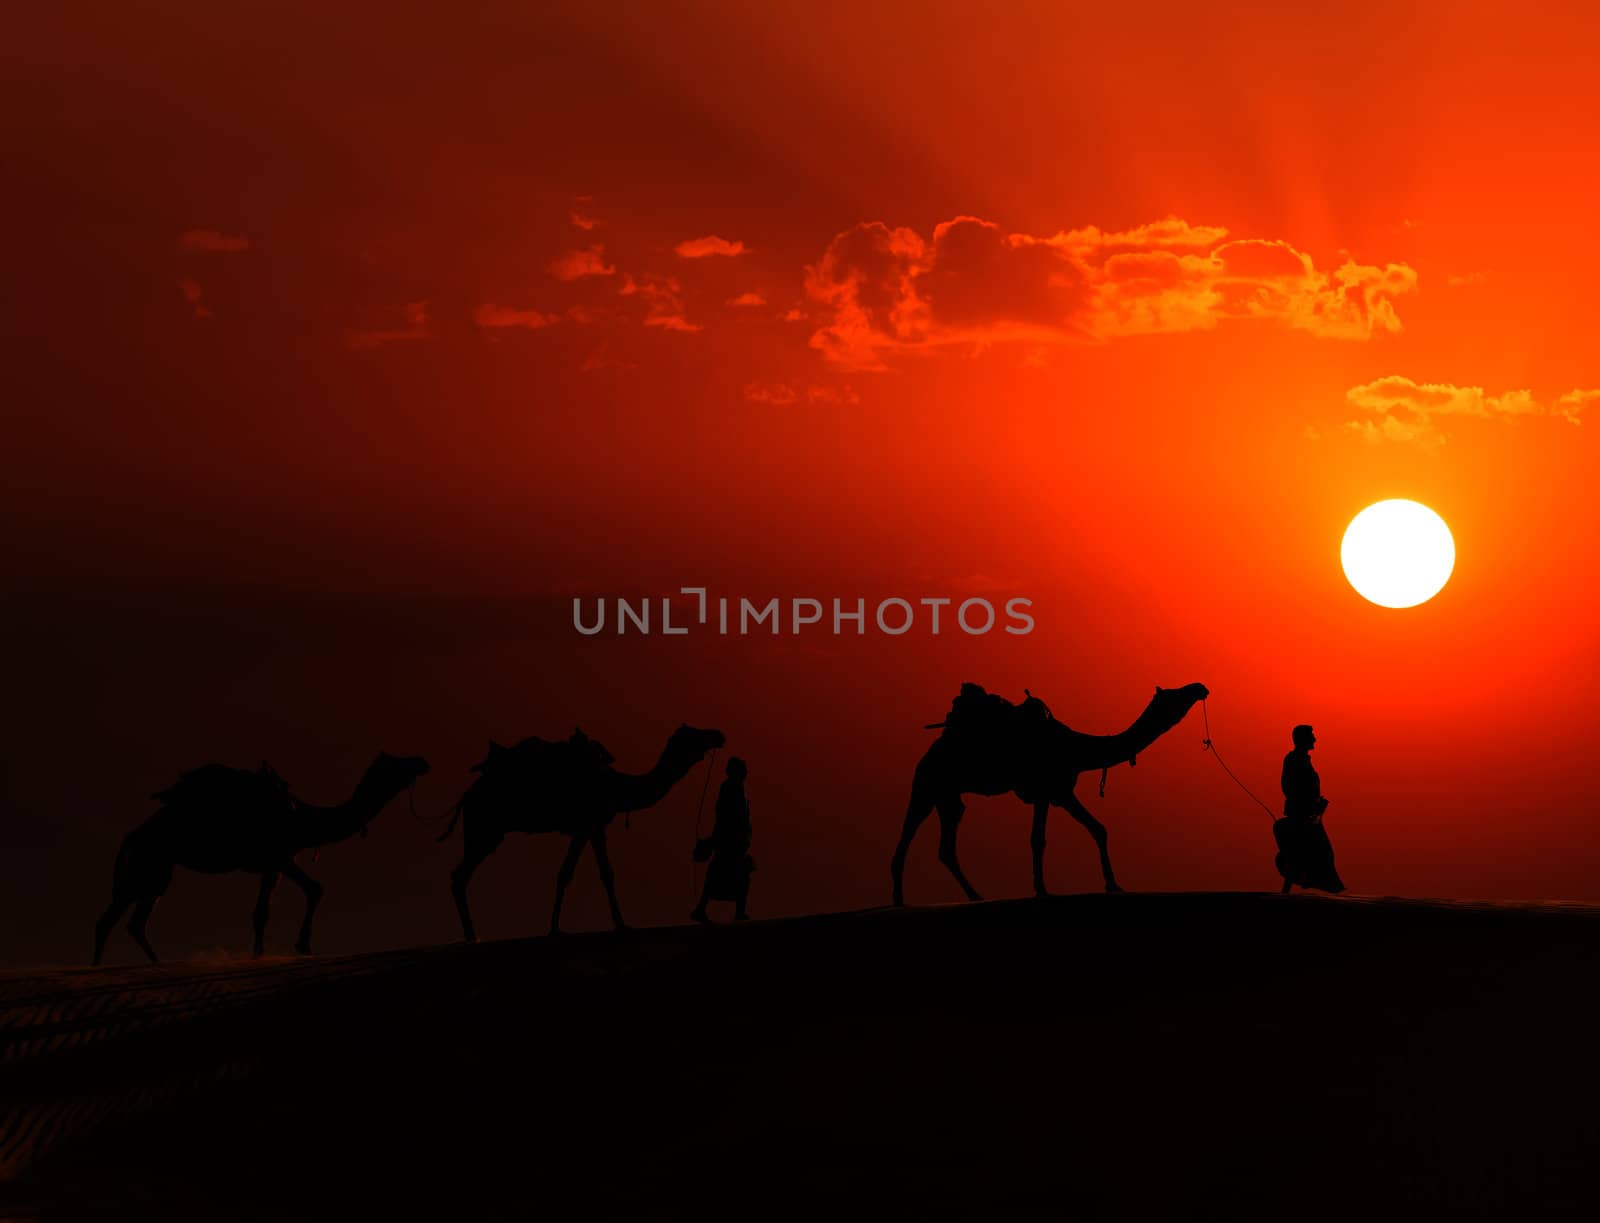 Rajasthan travel background - two indian cameleers (camel drivers) with camels silhouettes in dunes of Thar desert on sunset. Jaisalmer, Rajasthan, India